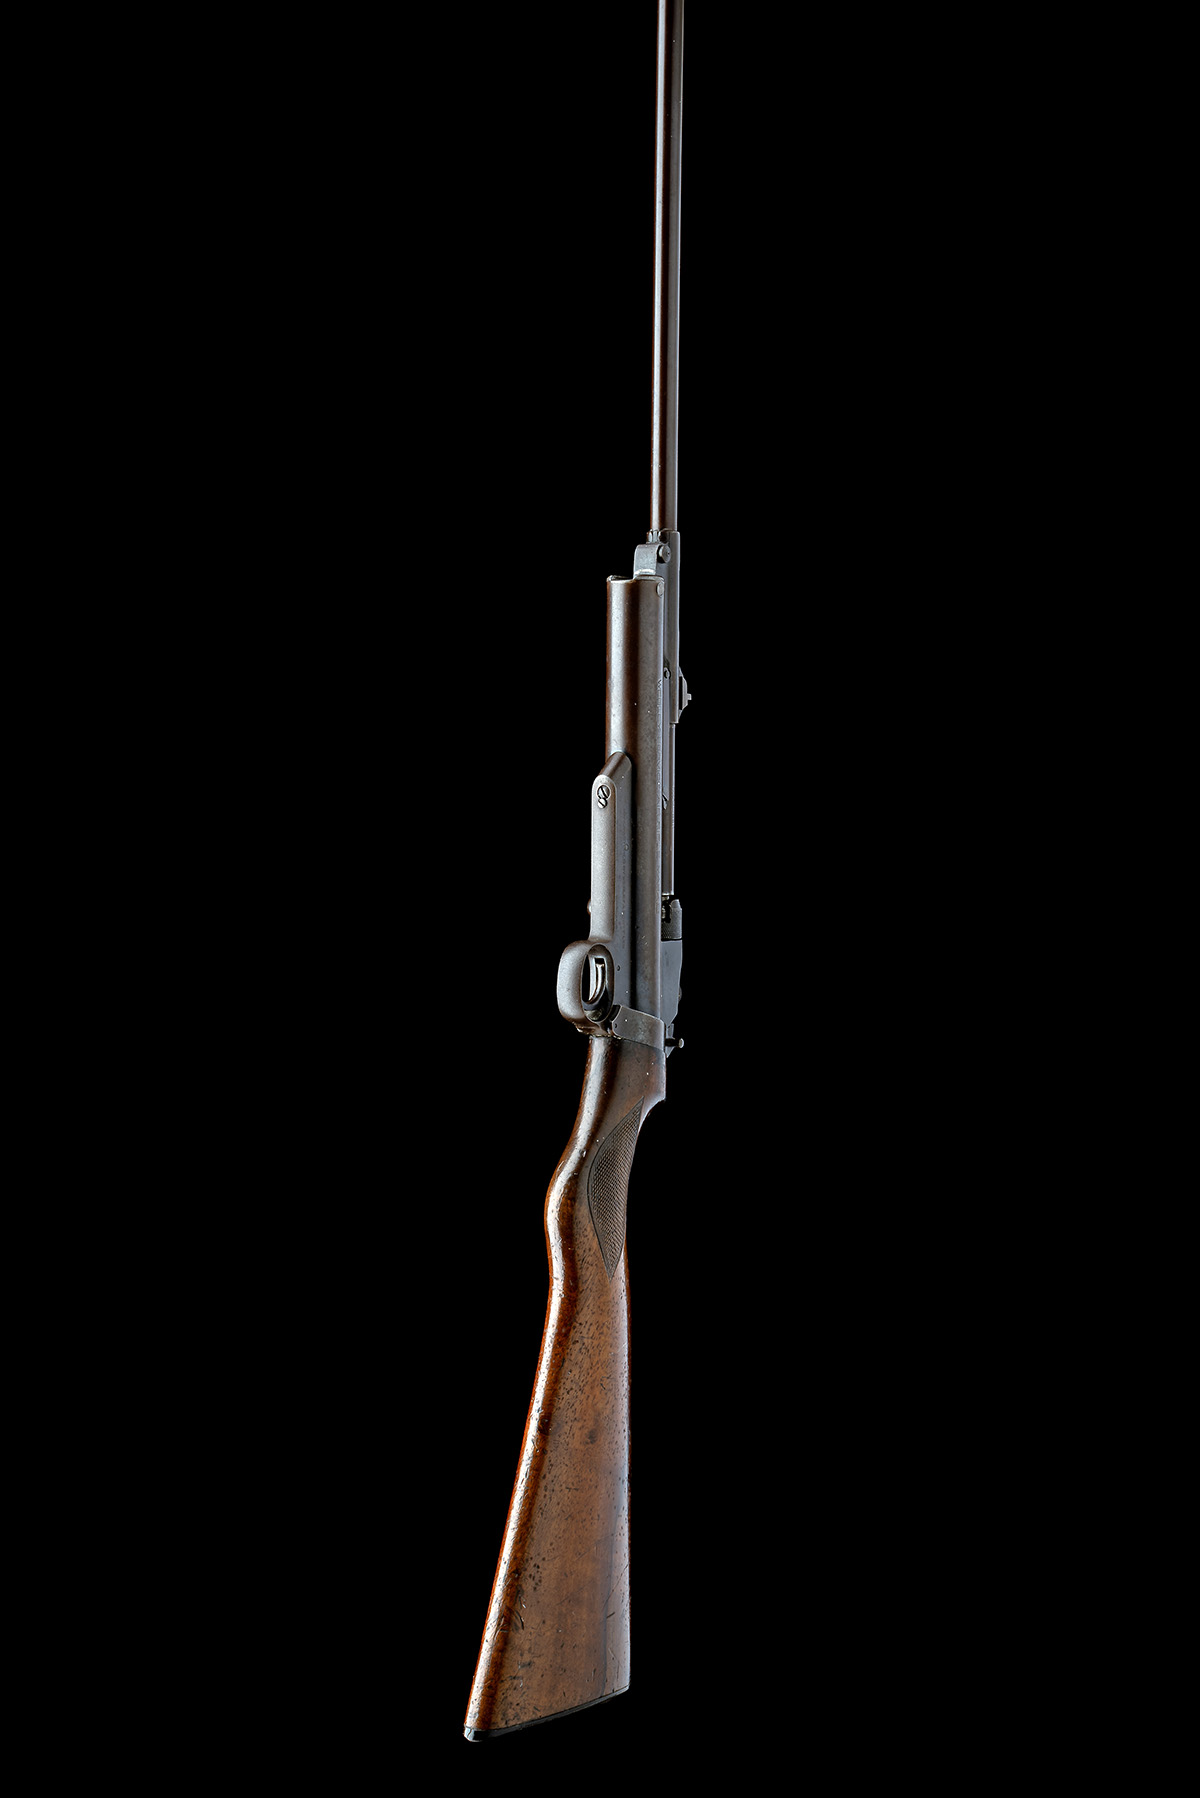 A .177 WEBLEY & SCOTT SERVICE MKII AIR-RIFLE, serial no. S4942, circa 1935, matching number 25 1/ - Image 6 of 8